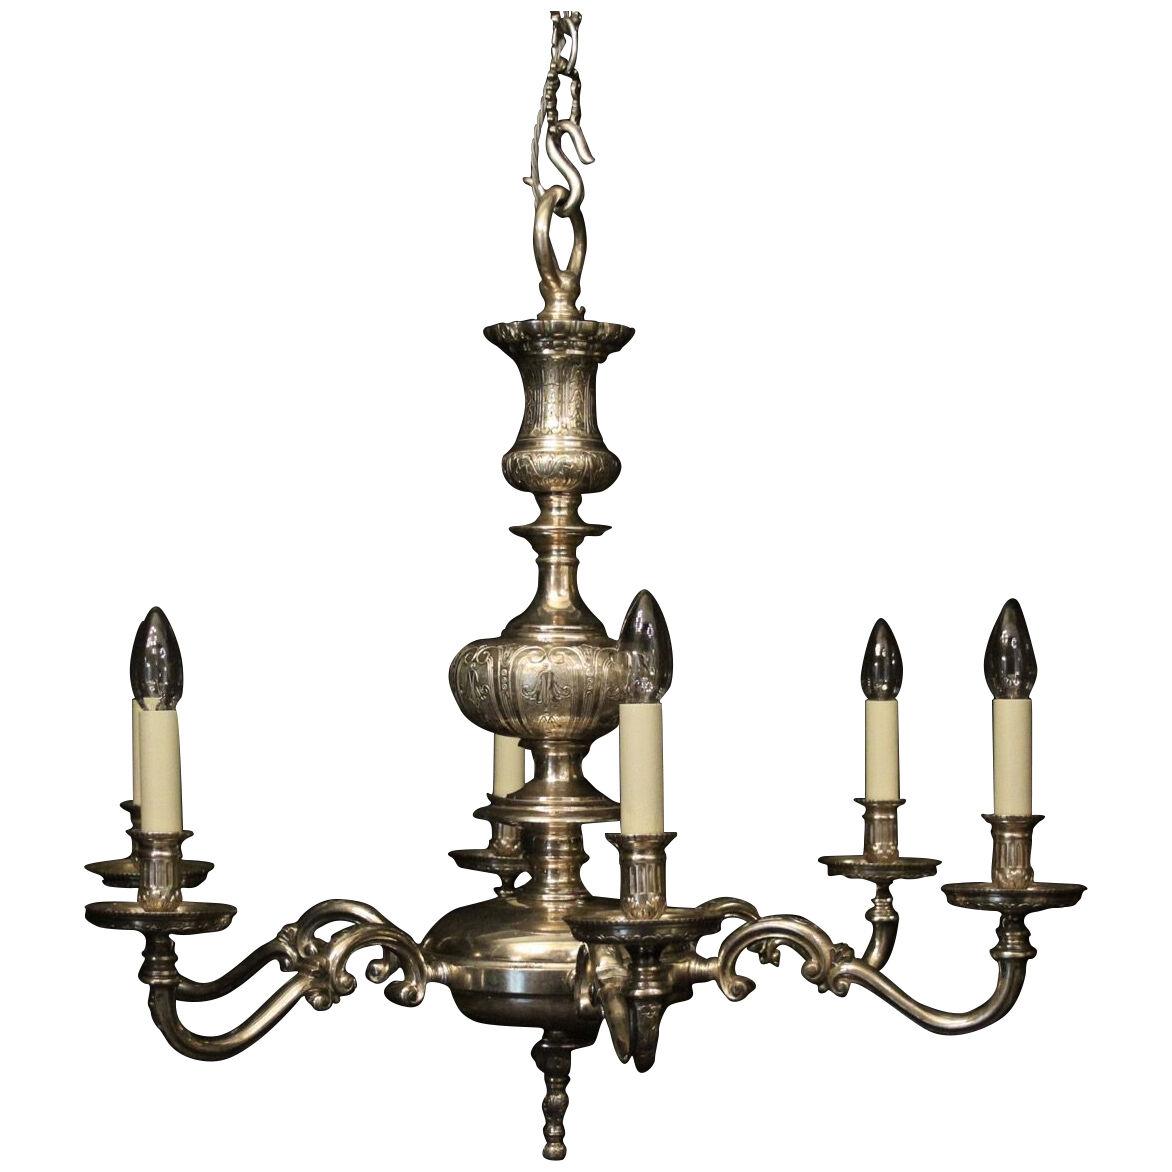 English Silver Plated 6 Light Antique Chandelier